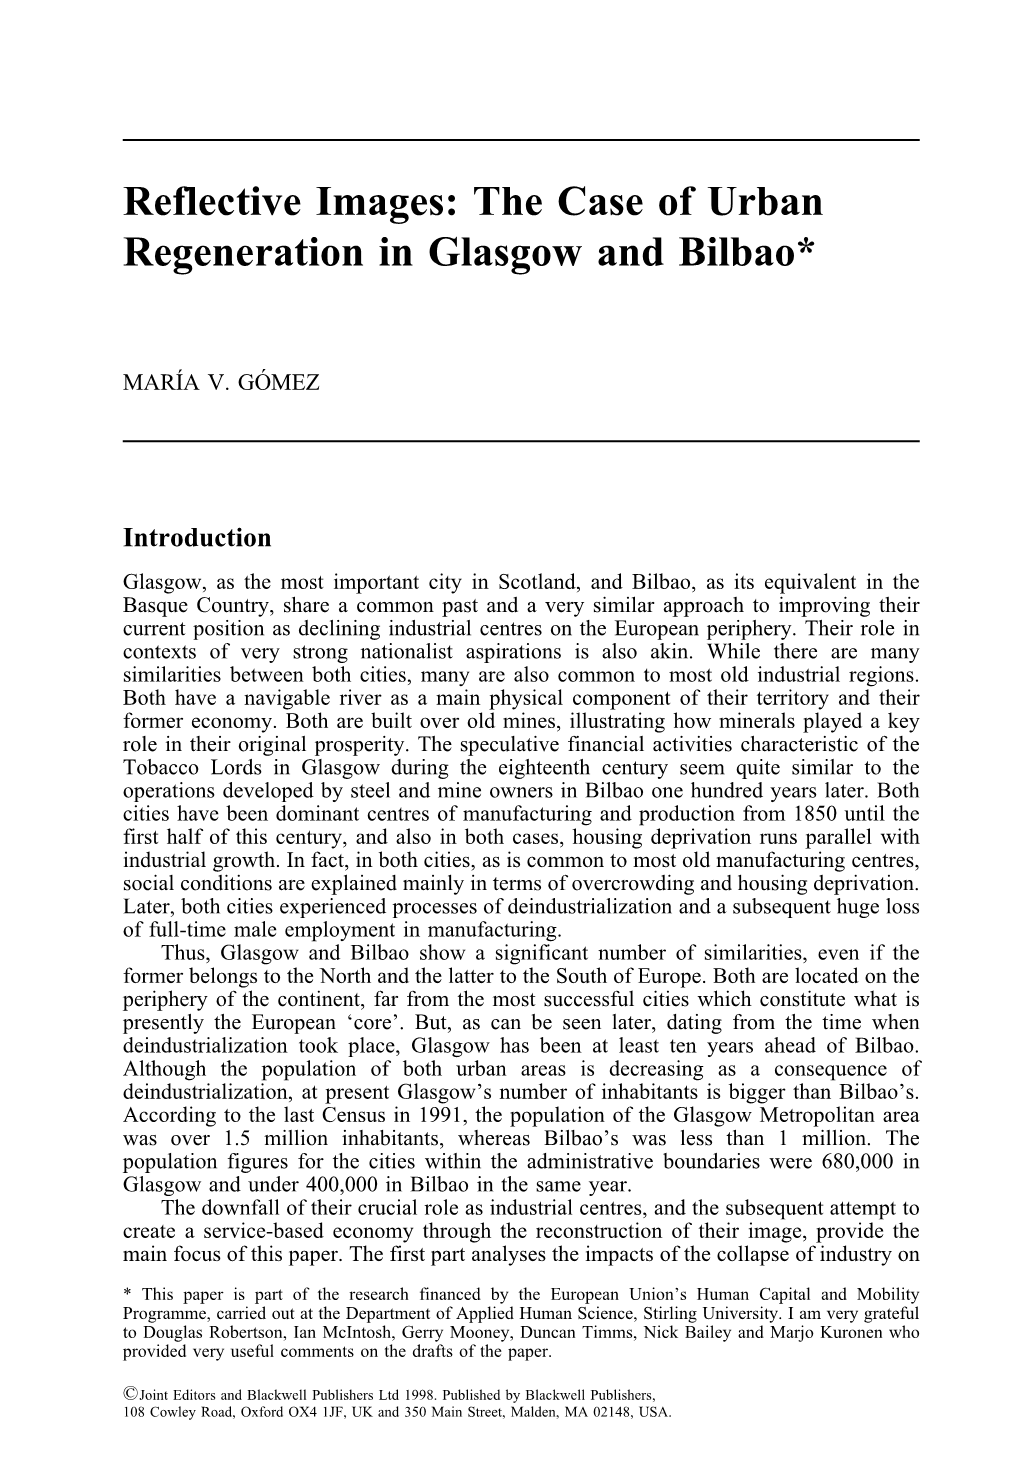 Reflective Images: the Case of Urban Regeneration in Glasgow and Bilbao*